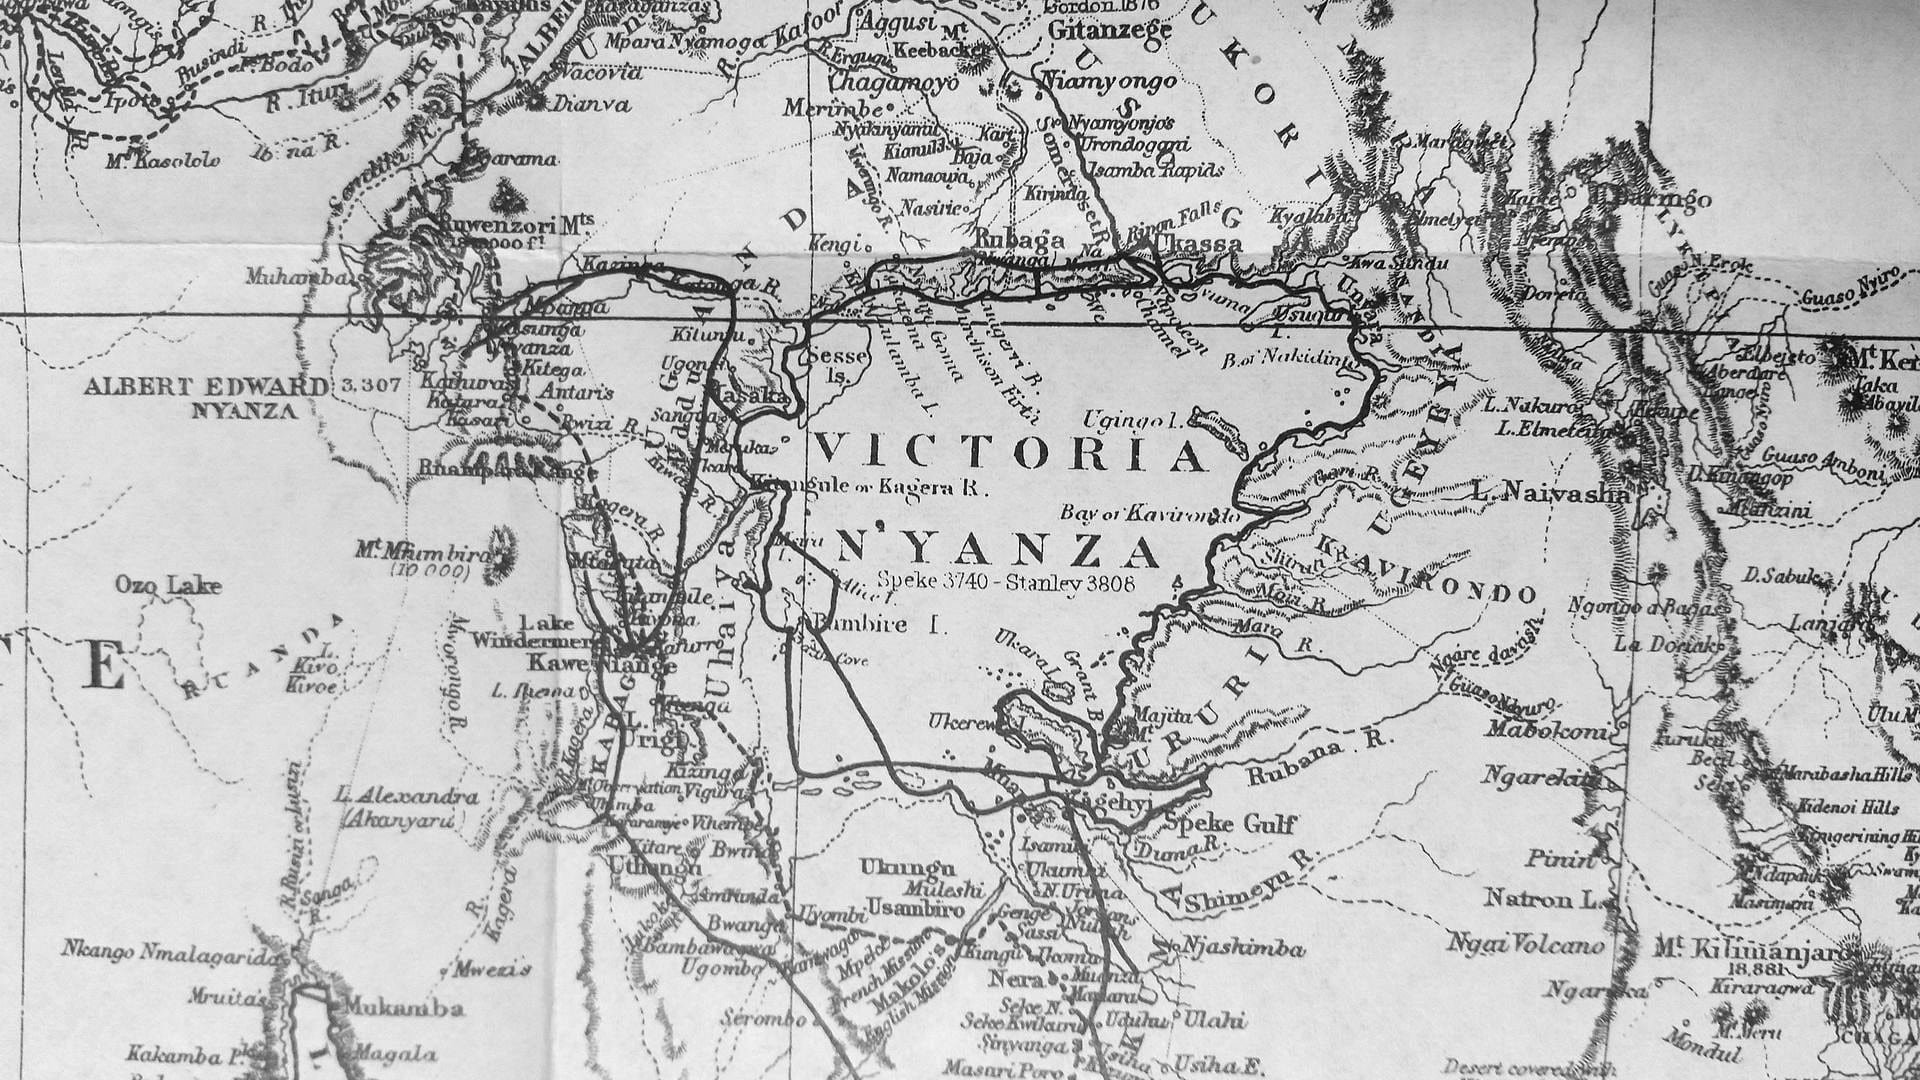 Stanley's route shown on the bold line - Victoria Nyanza